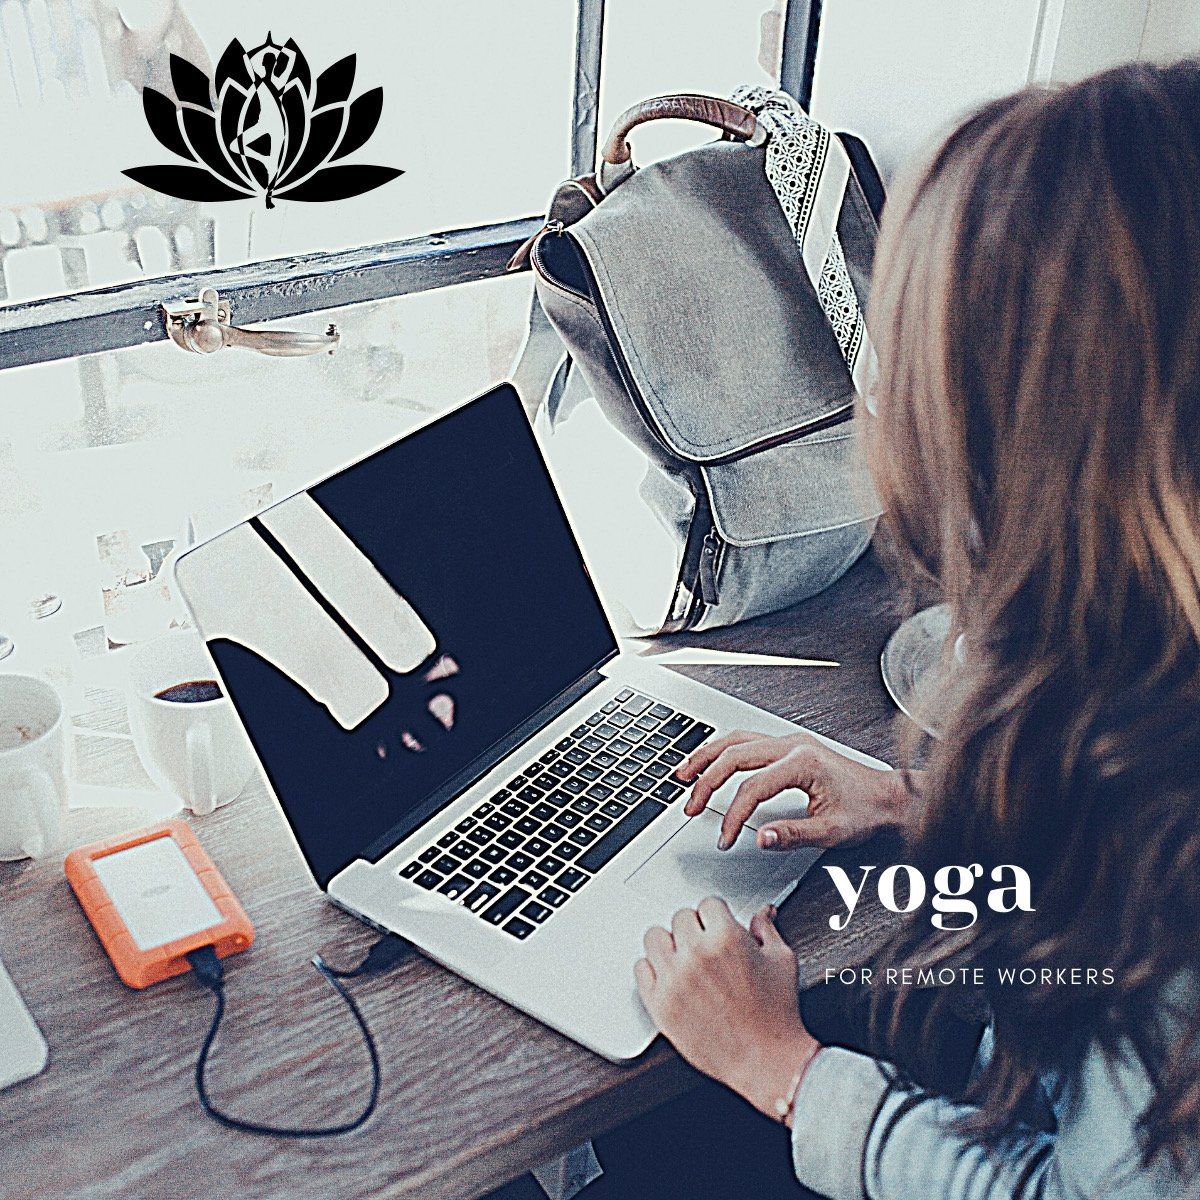 Remote worker? I've got you covered with these yoga practices!